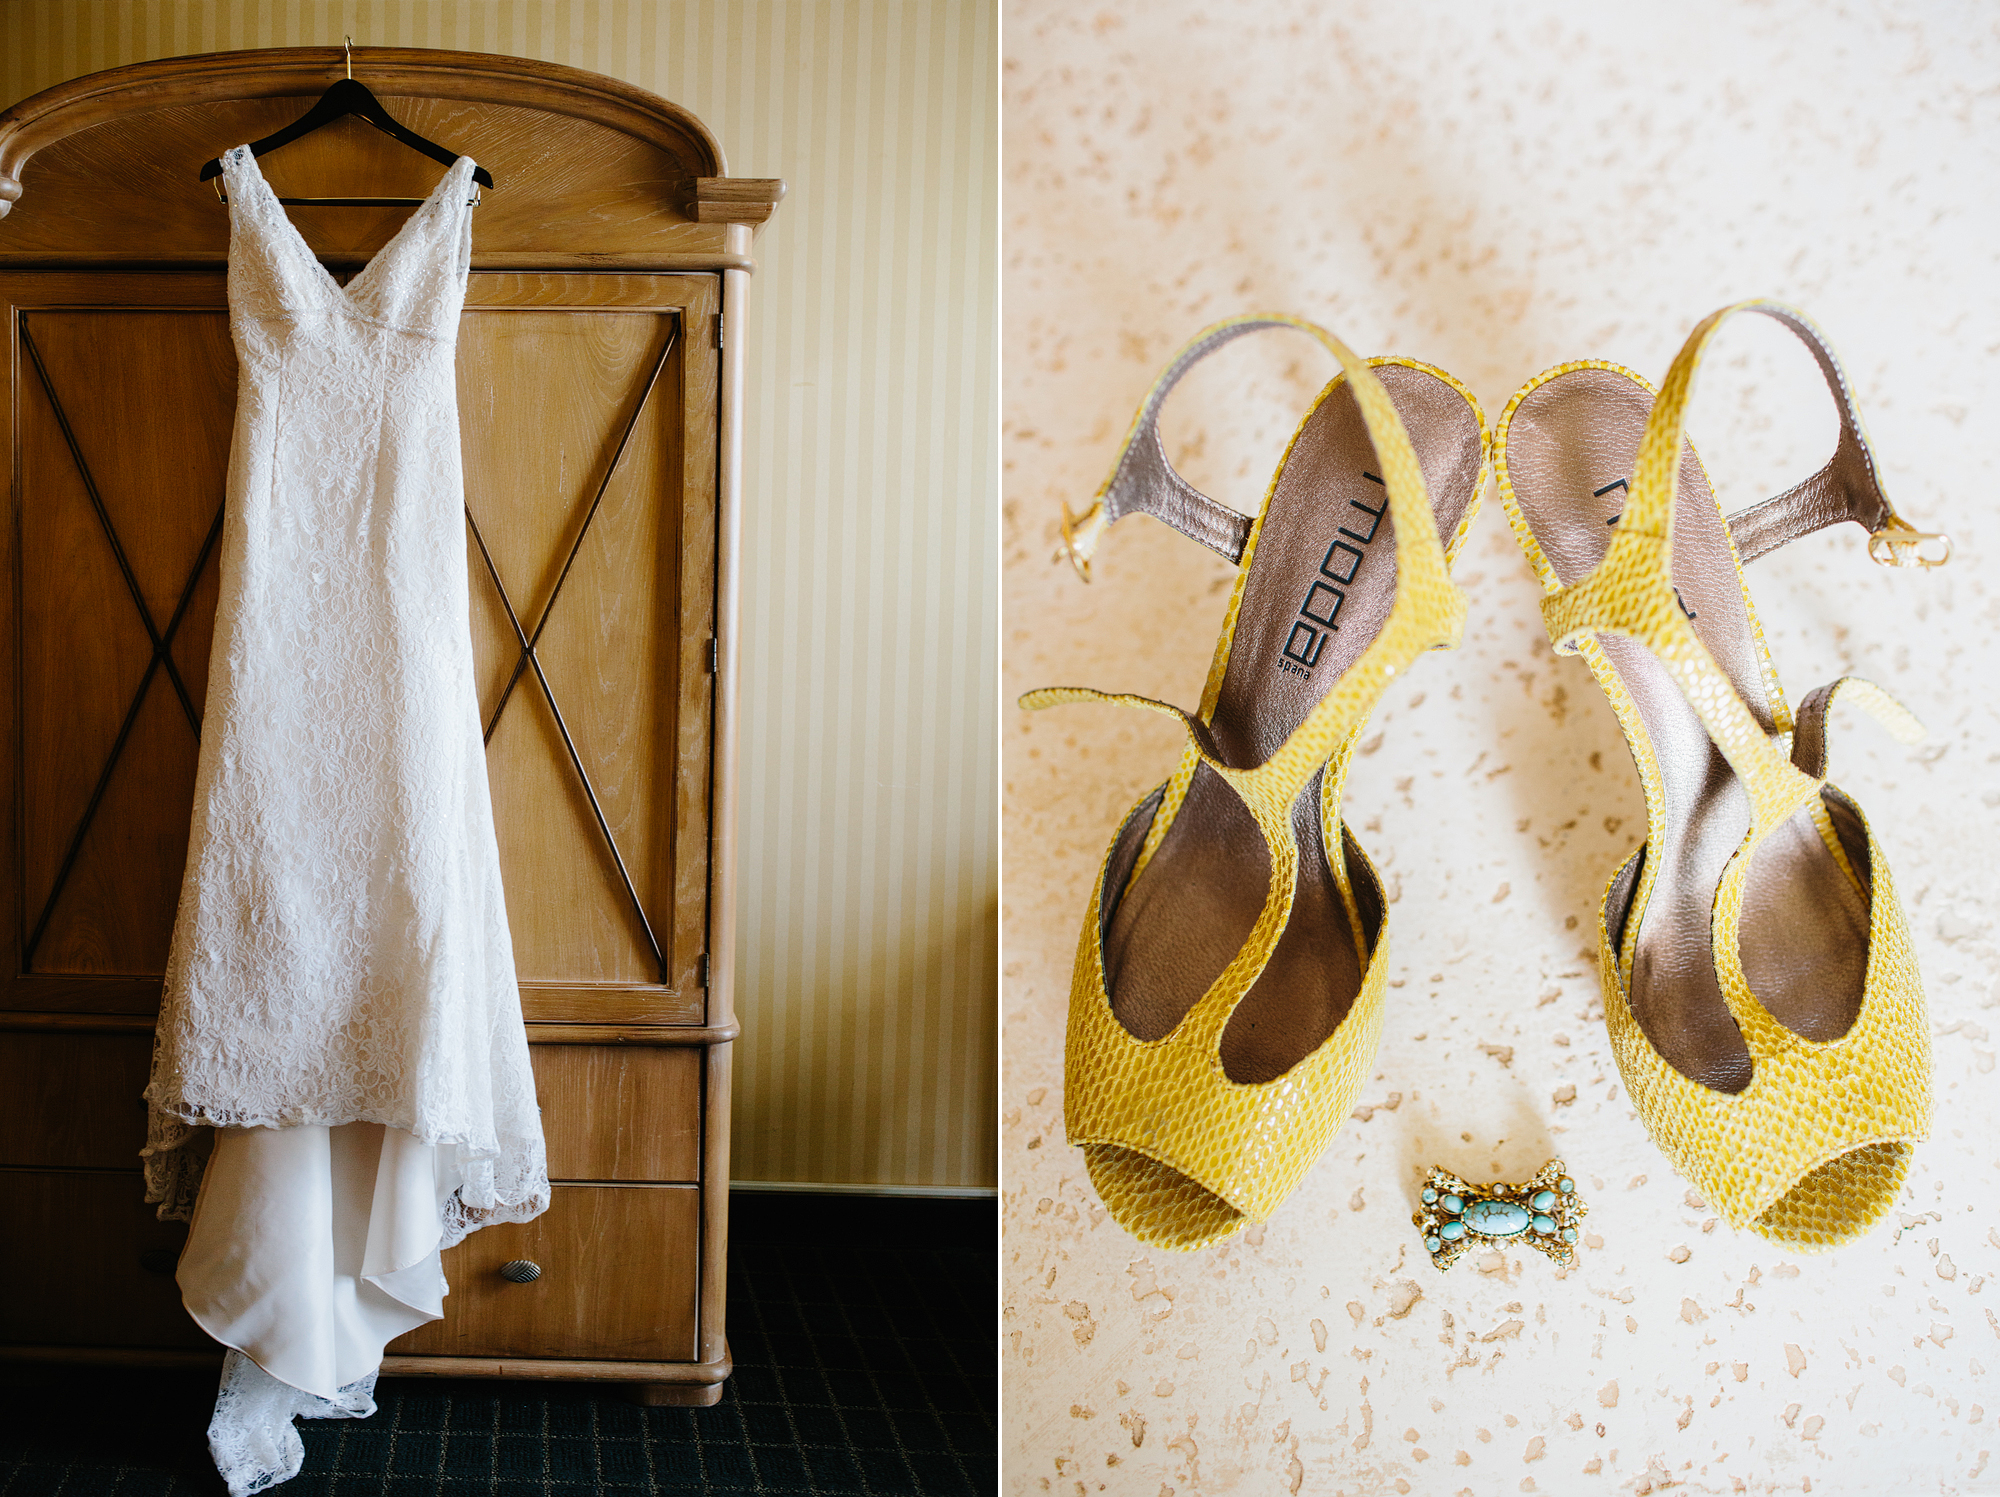 These are photos of Rachel's dress and shoes.